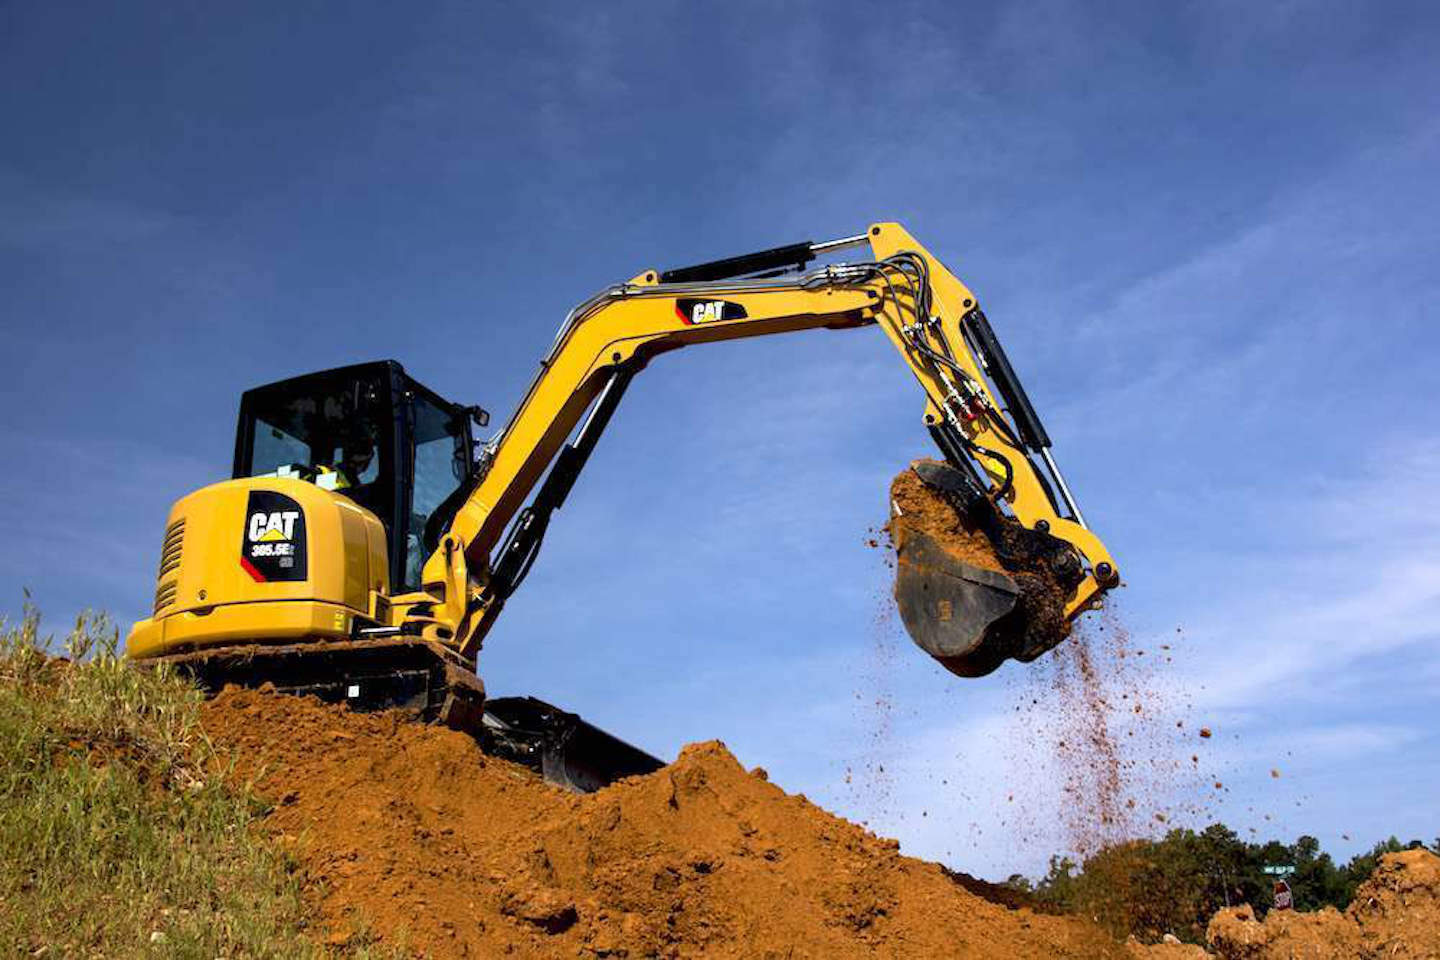 Caterpillar E2 Series Mini Excavators Overcome Emissions Challenges With High Def Hydraulics Smart Technology Equipment World